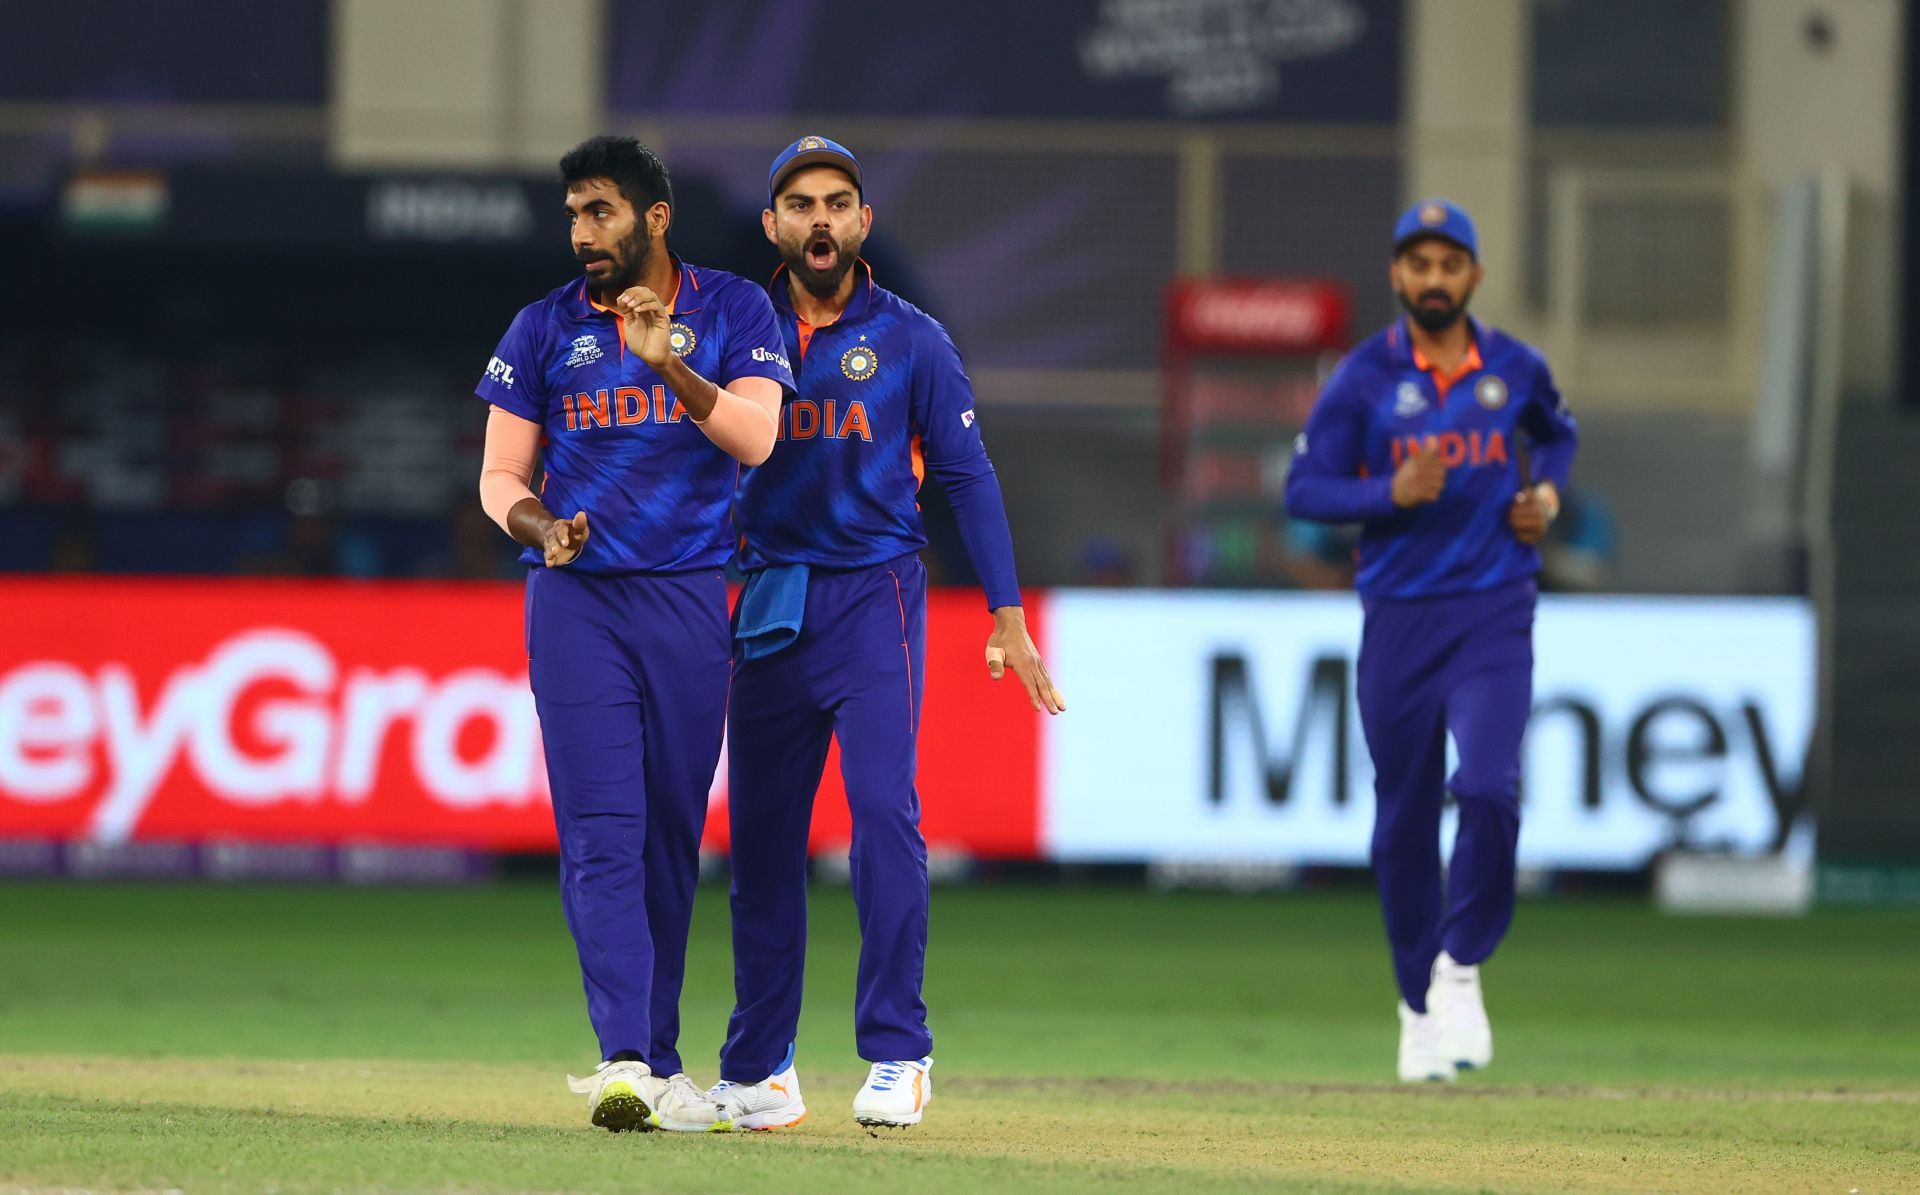 Jasprit Bumrah is the spearhead of the Indian bowling lineup